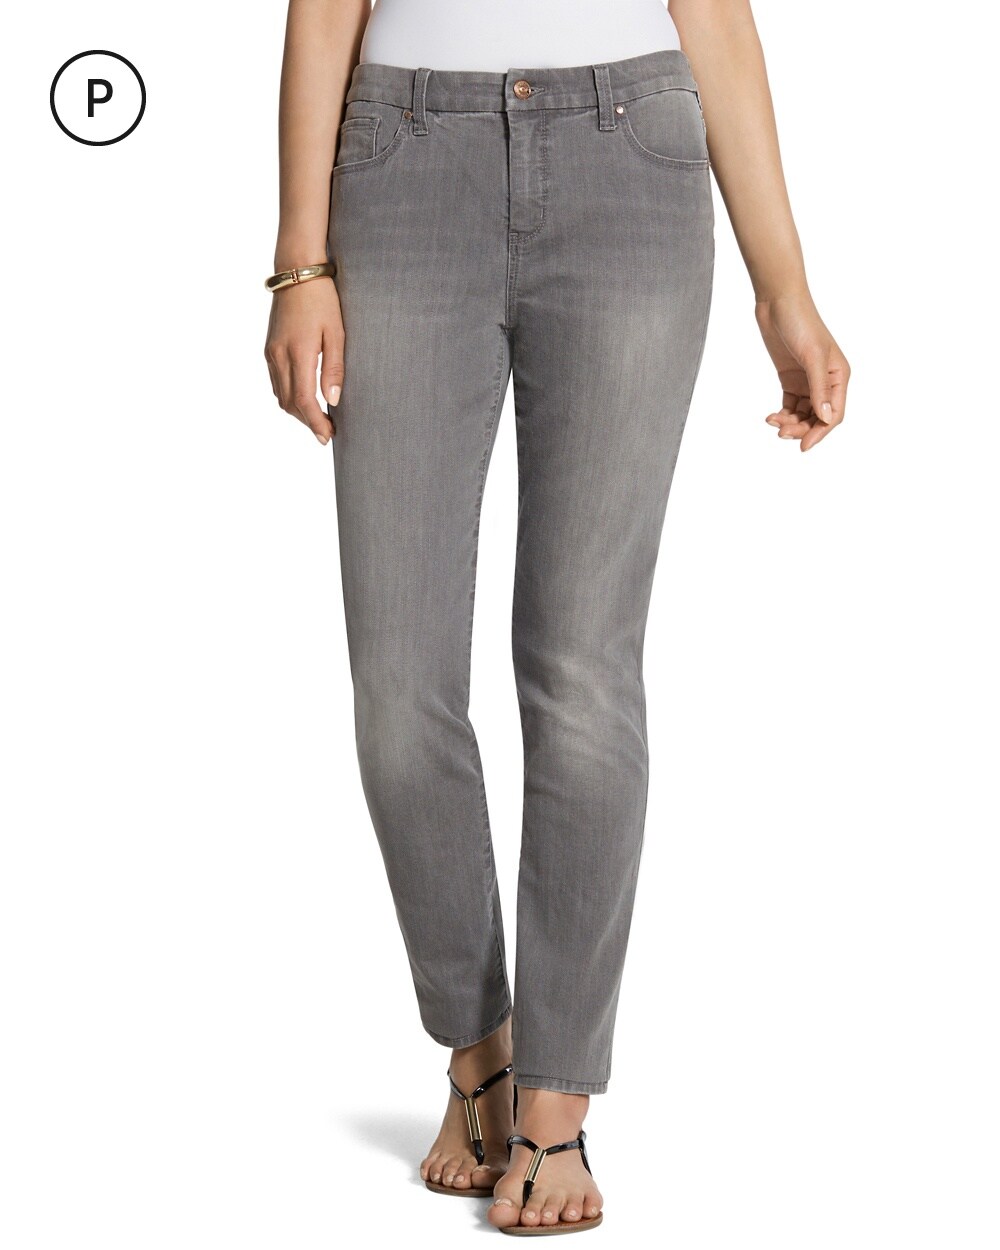 So Slimming Petite Girlfriend Gray Ankle Jeans